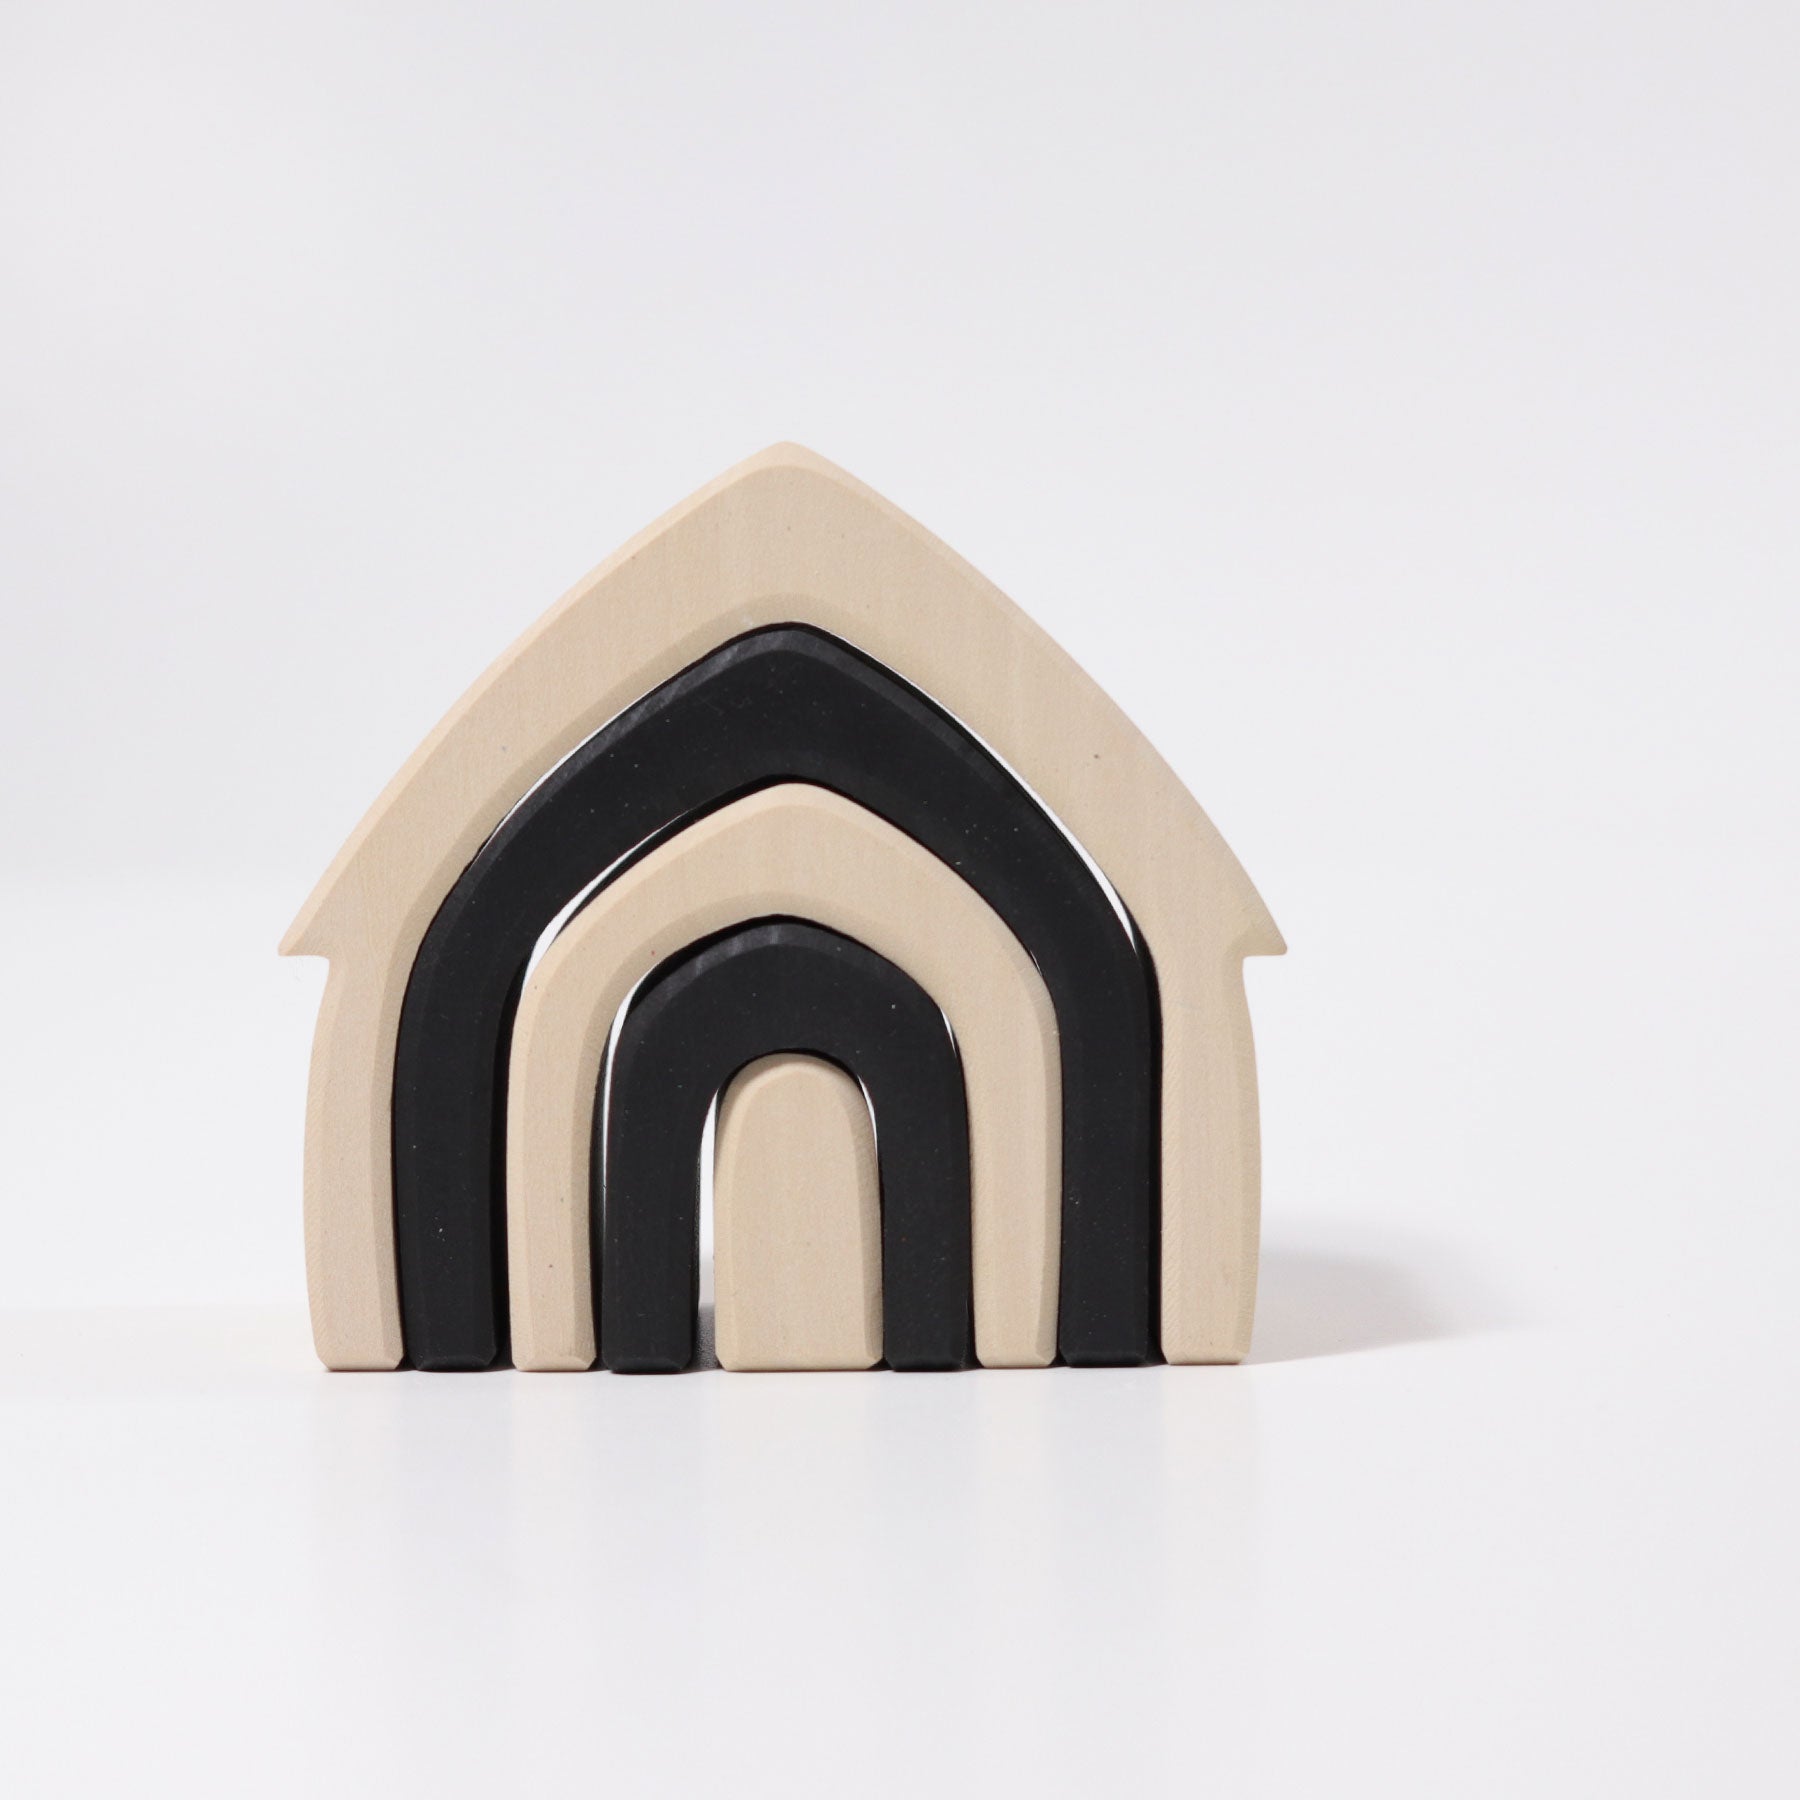 Overstock Grimm’s Stacking House Monochrome